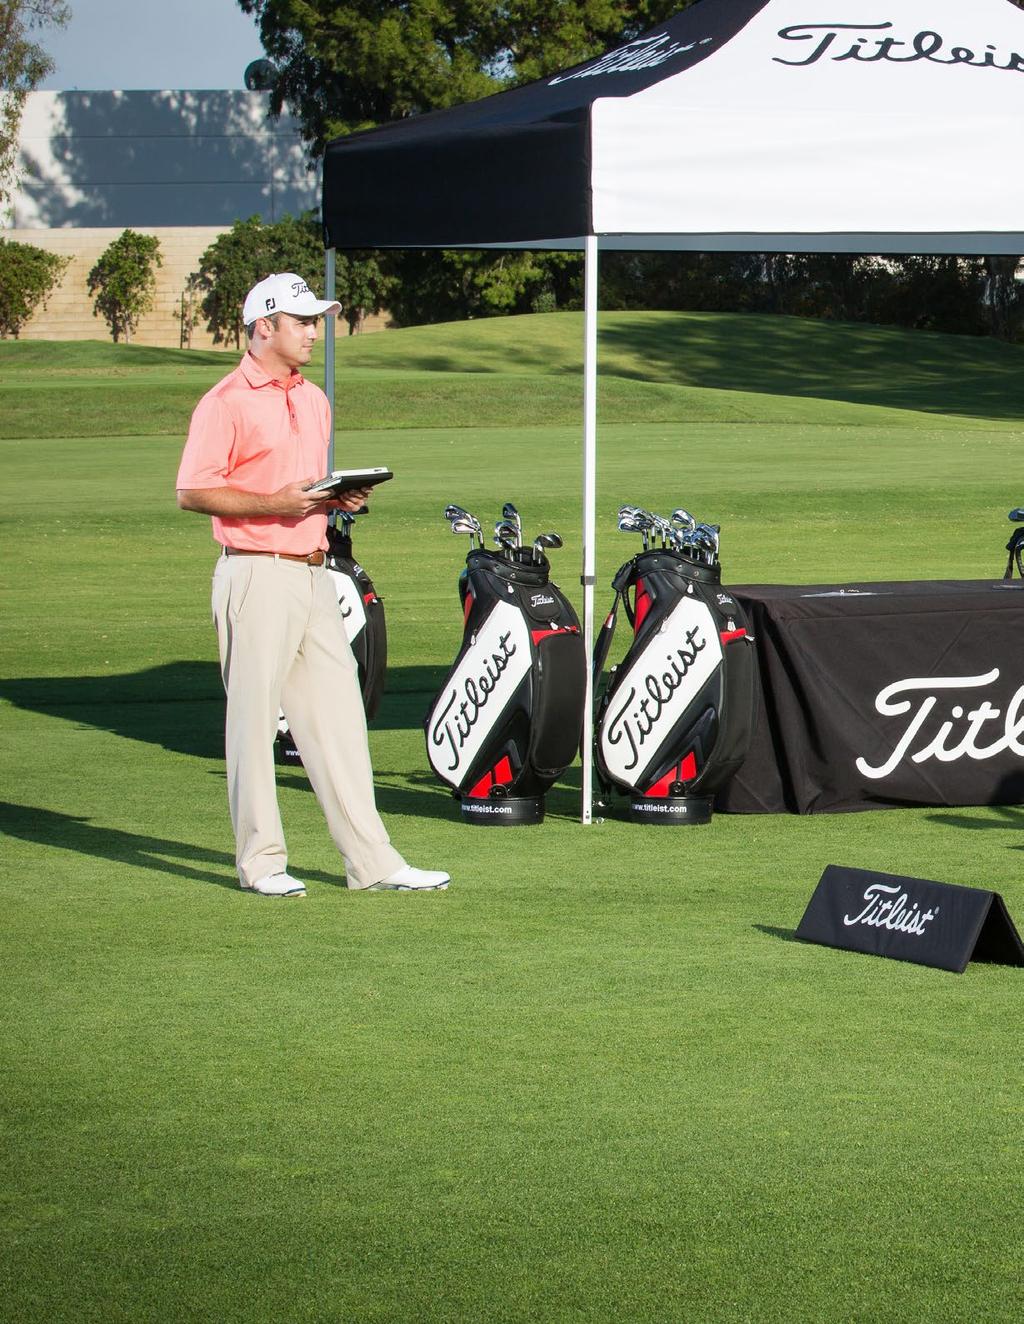 Fitting SPECIFICATIONS 23 BETTER FIT. BETTER GAME. Golf is all about confidence, in your game and your equipment.